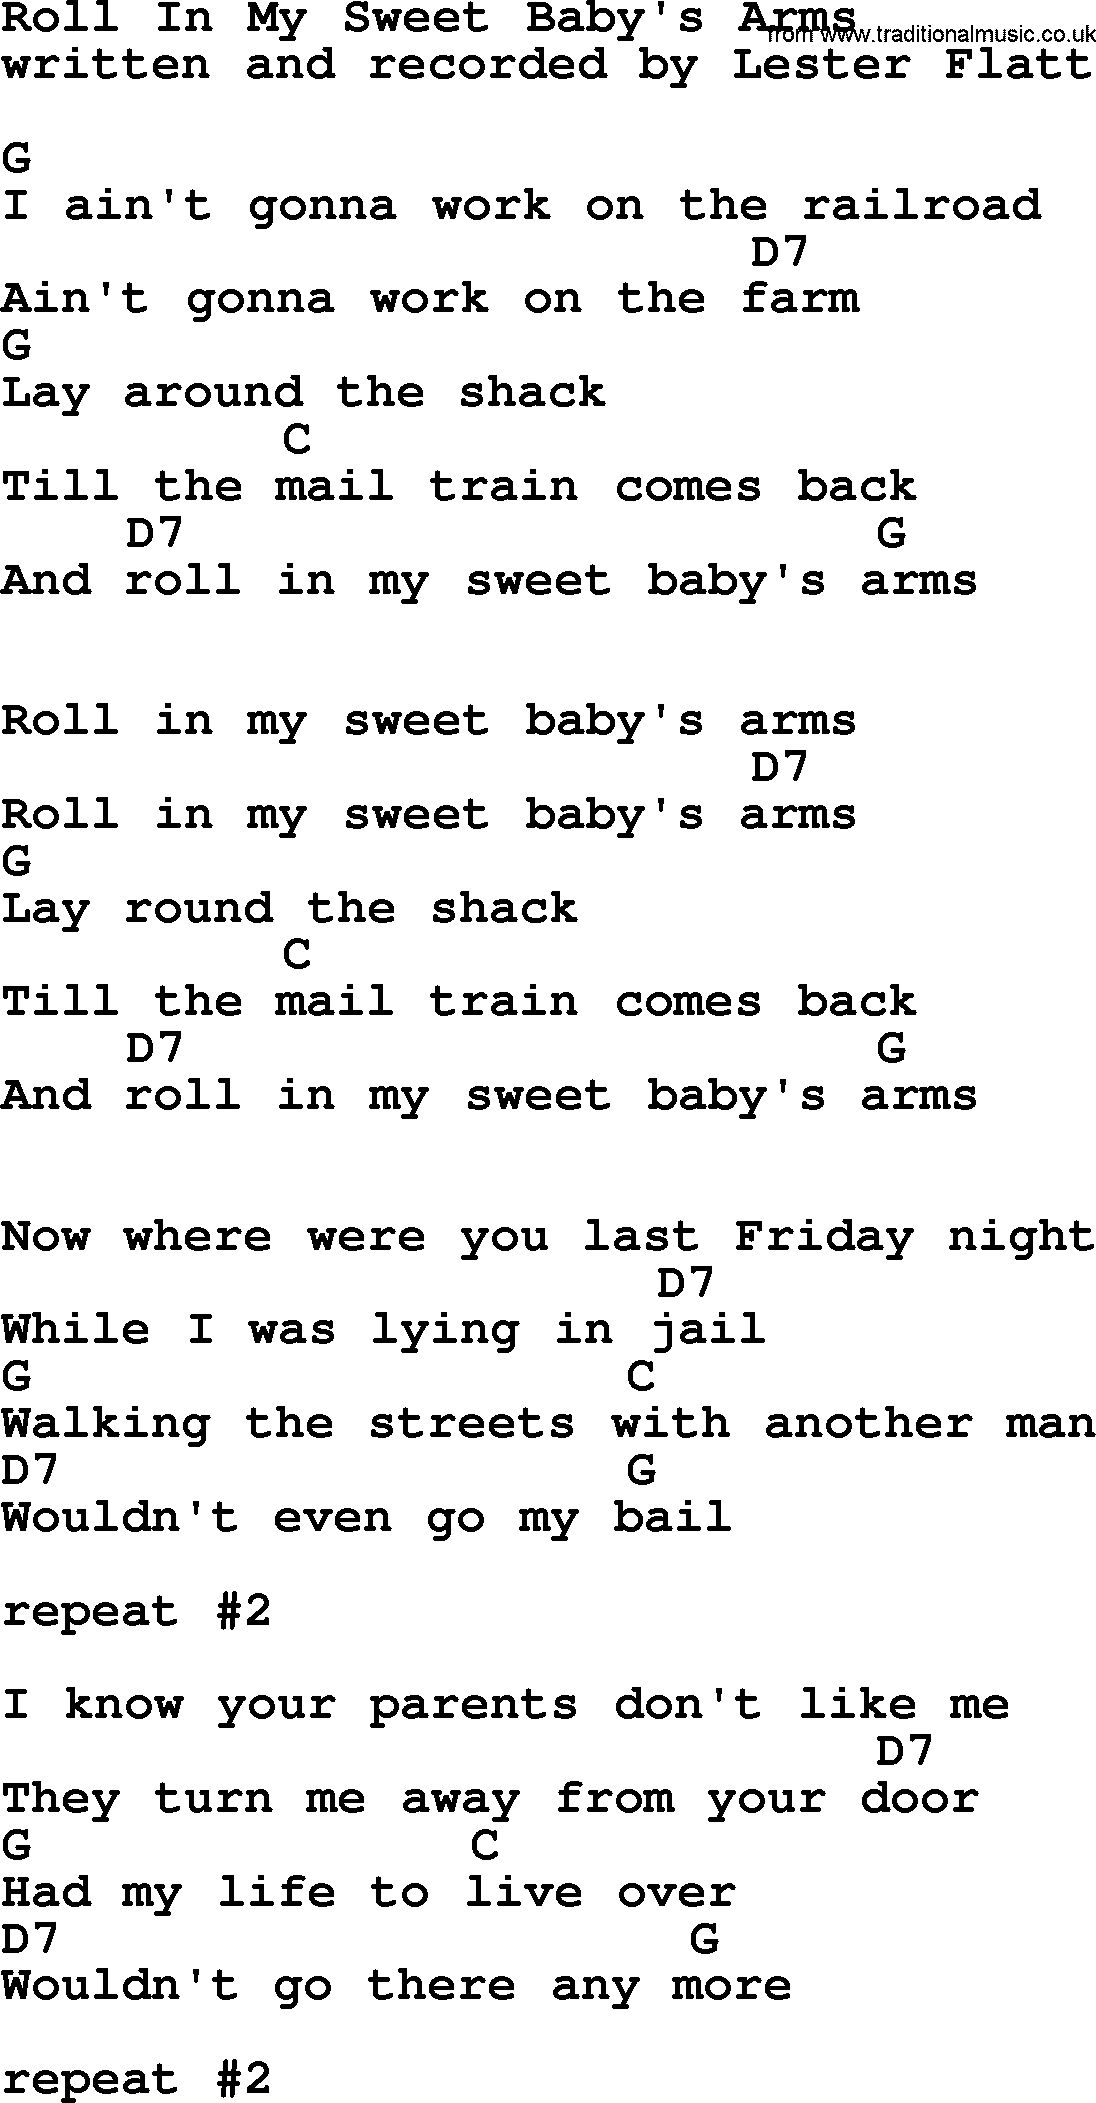 Bluegrass song: Roll In My Sweet Baby's Arms, lyrics and chords